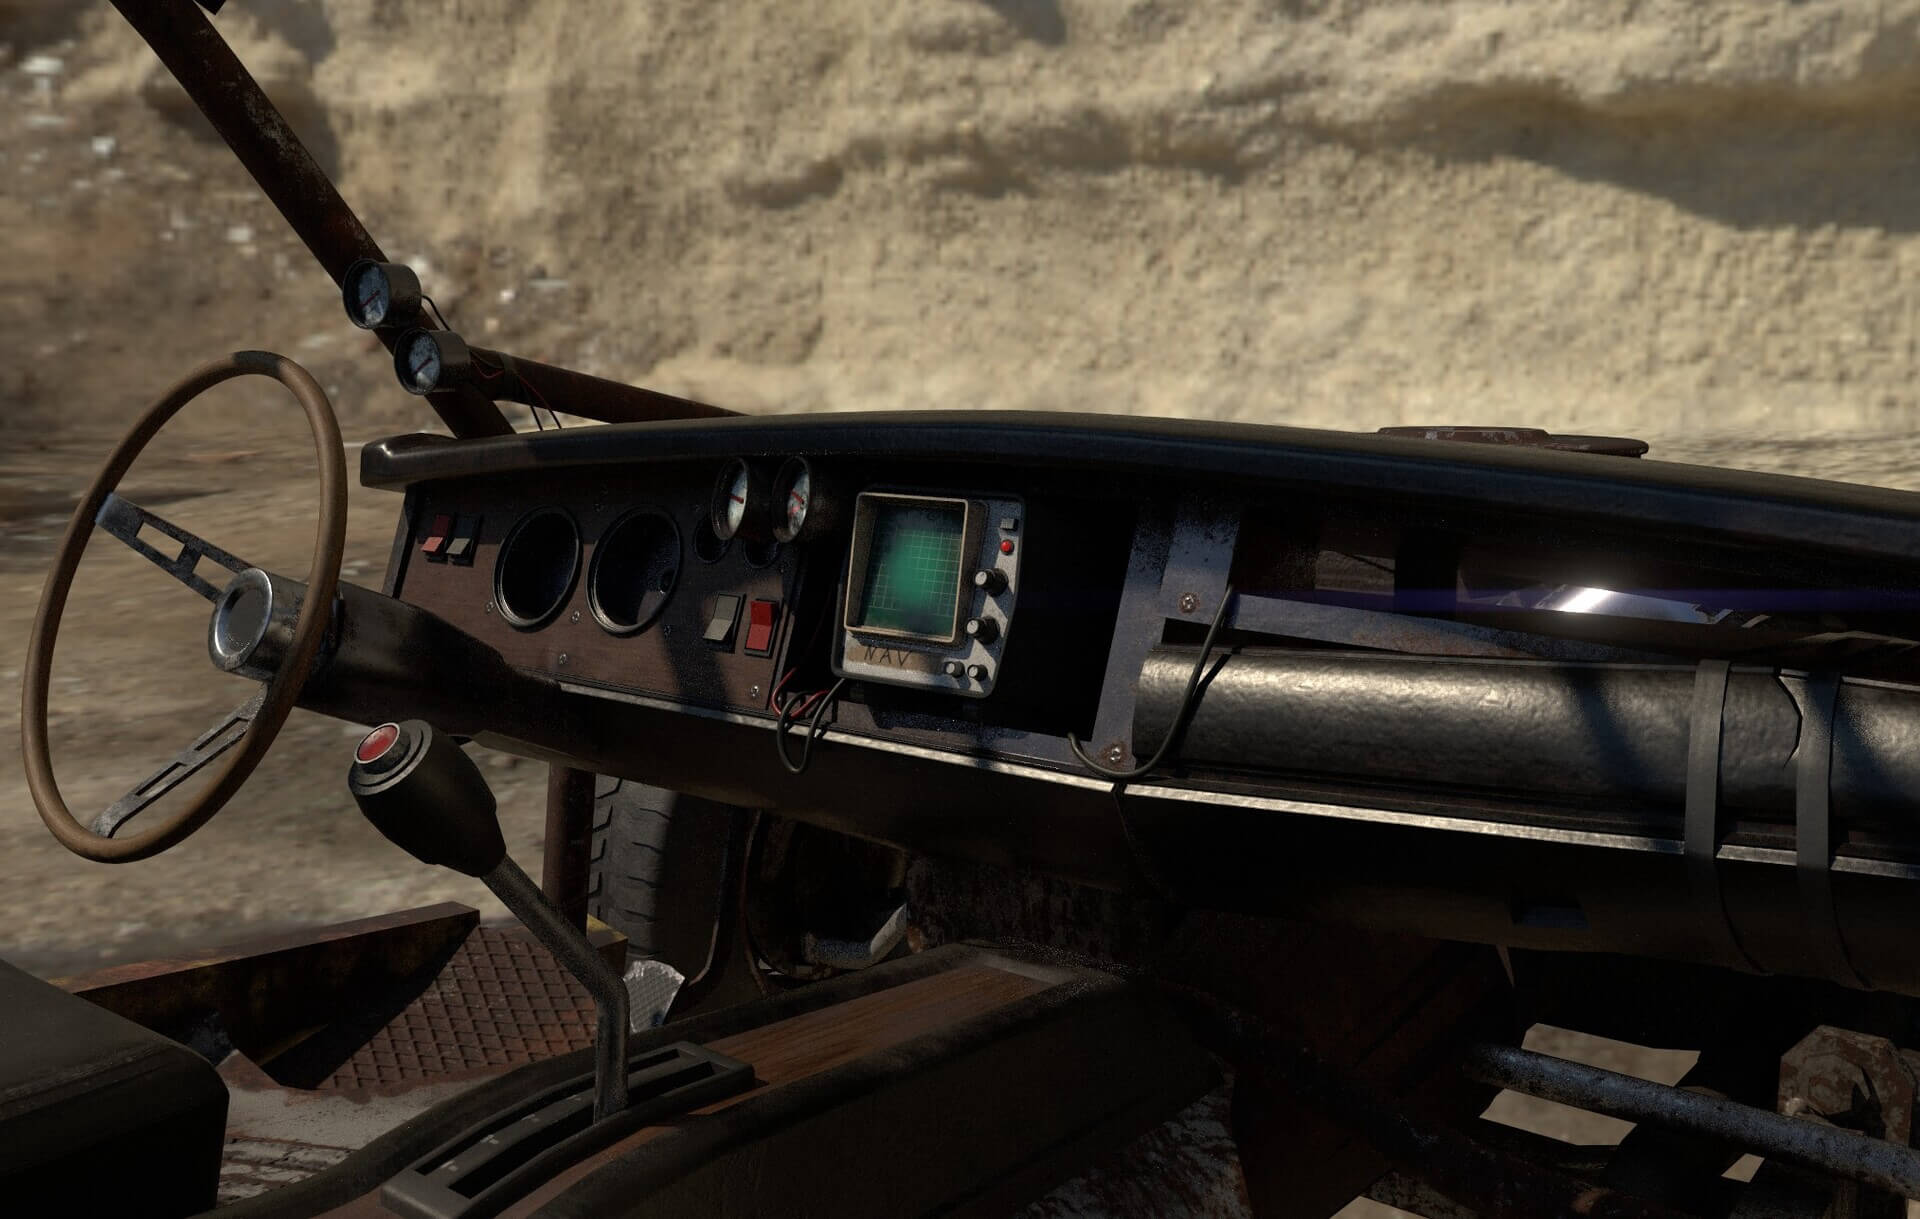 The driver's seat of the buggy from Half-Life 2, remade in high-def. It's a scrappy-looking open-air car interior.